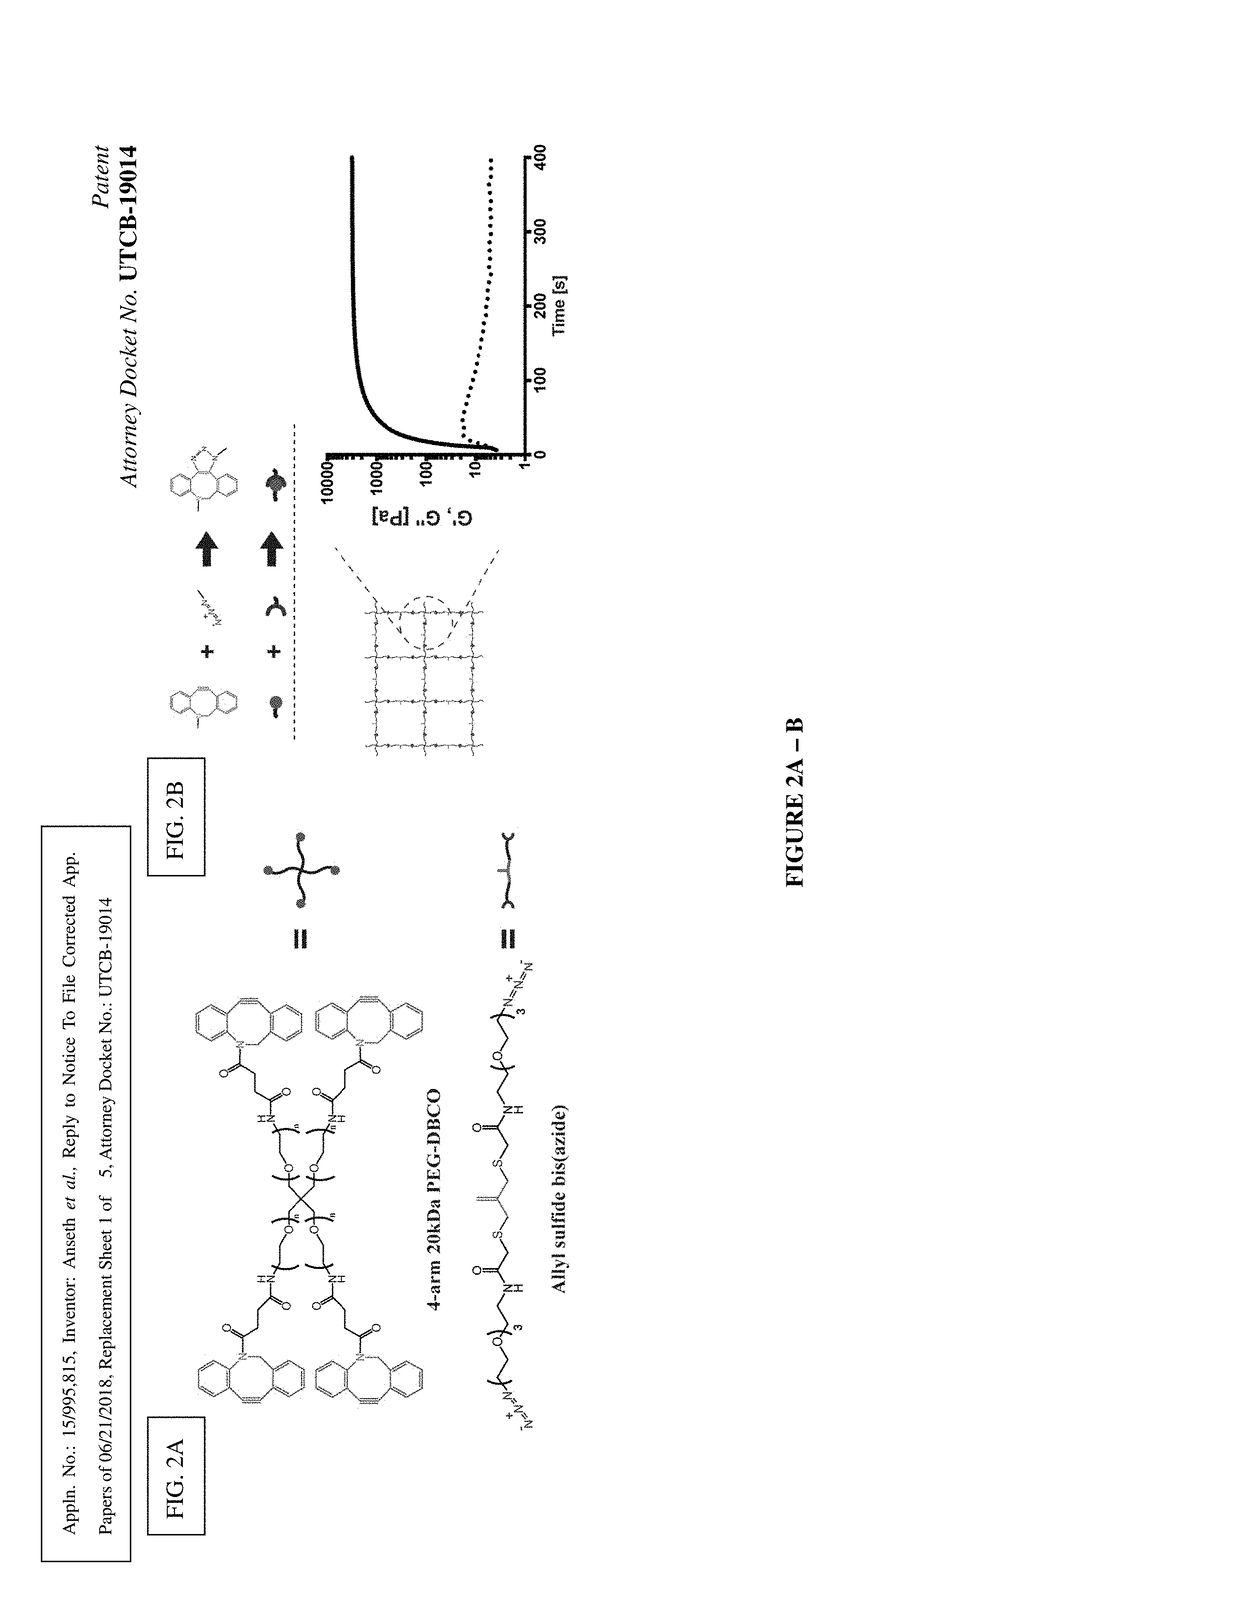 Amplified Photodegradation of Hydrogels and Methods of Producing the Same